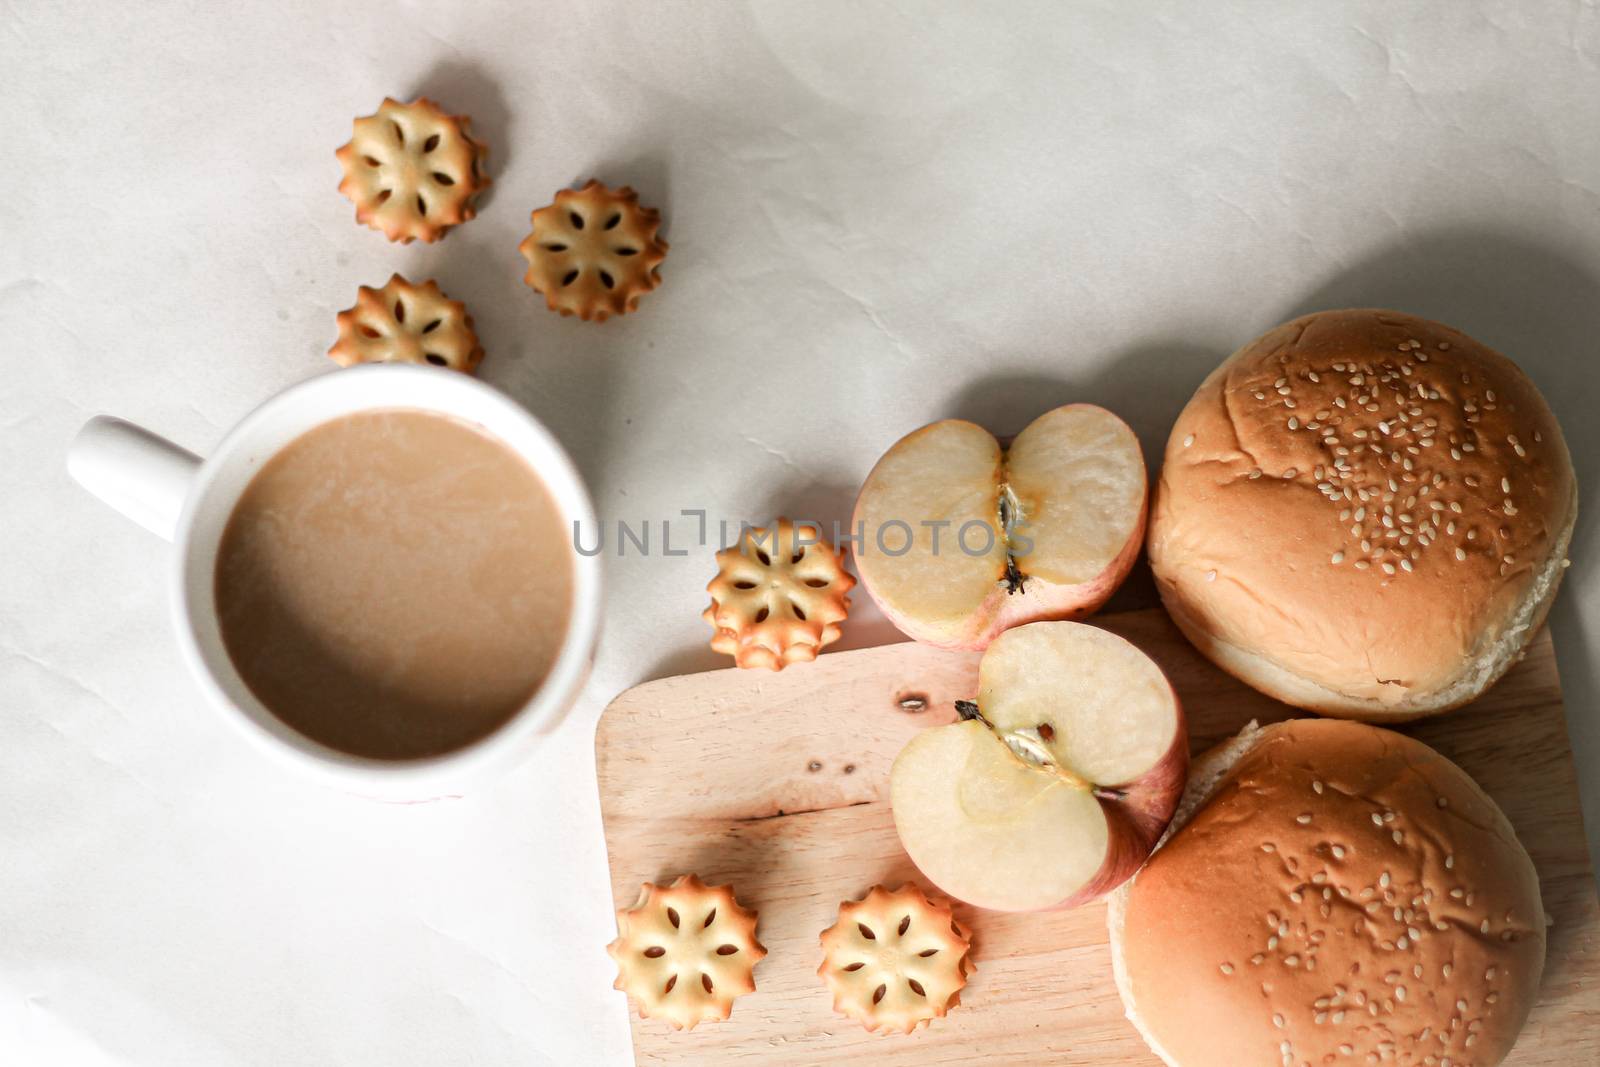 Home baked bread, biscuits and apple slices showing the comfort and cozy feeling of being at home